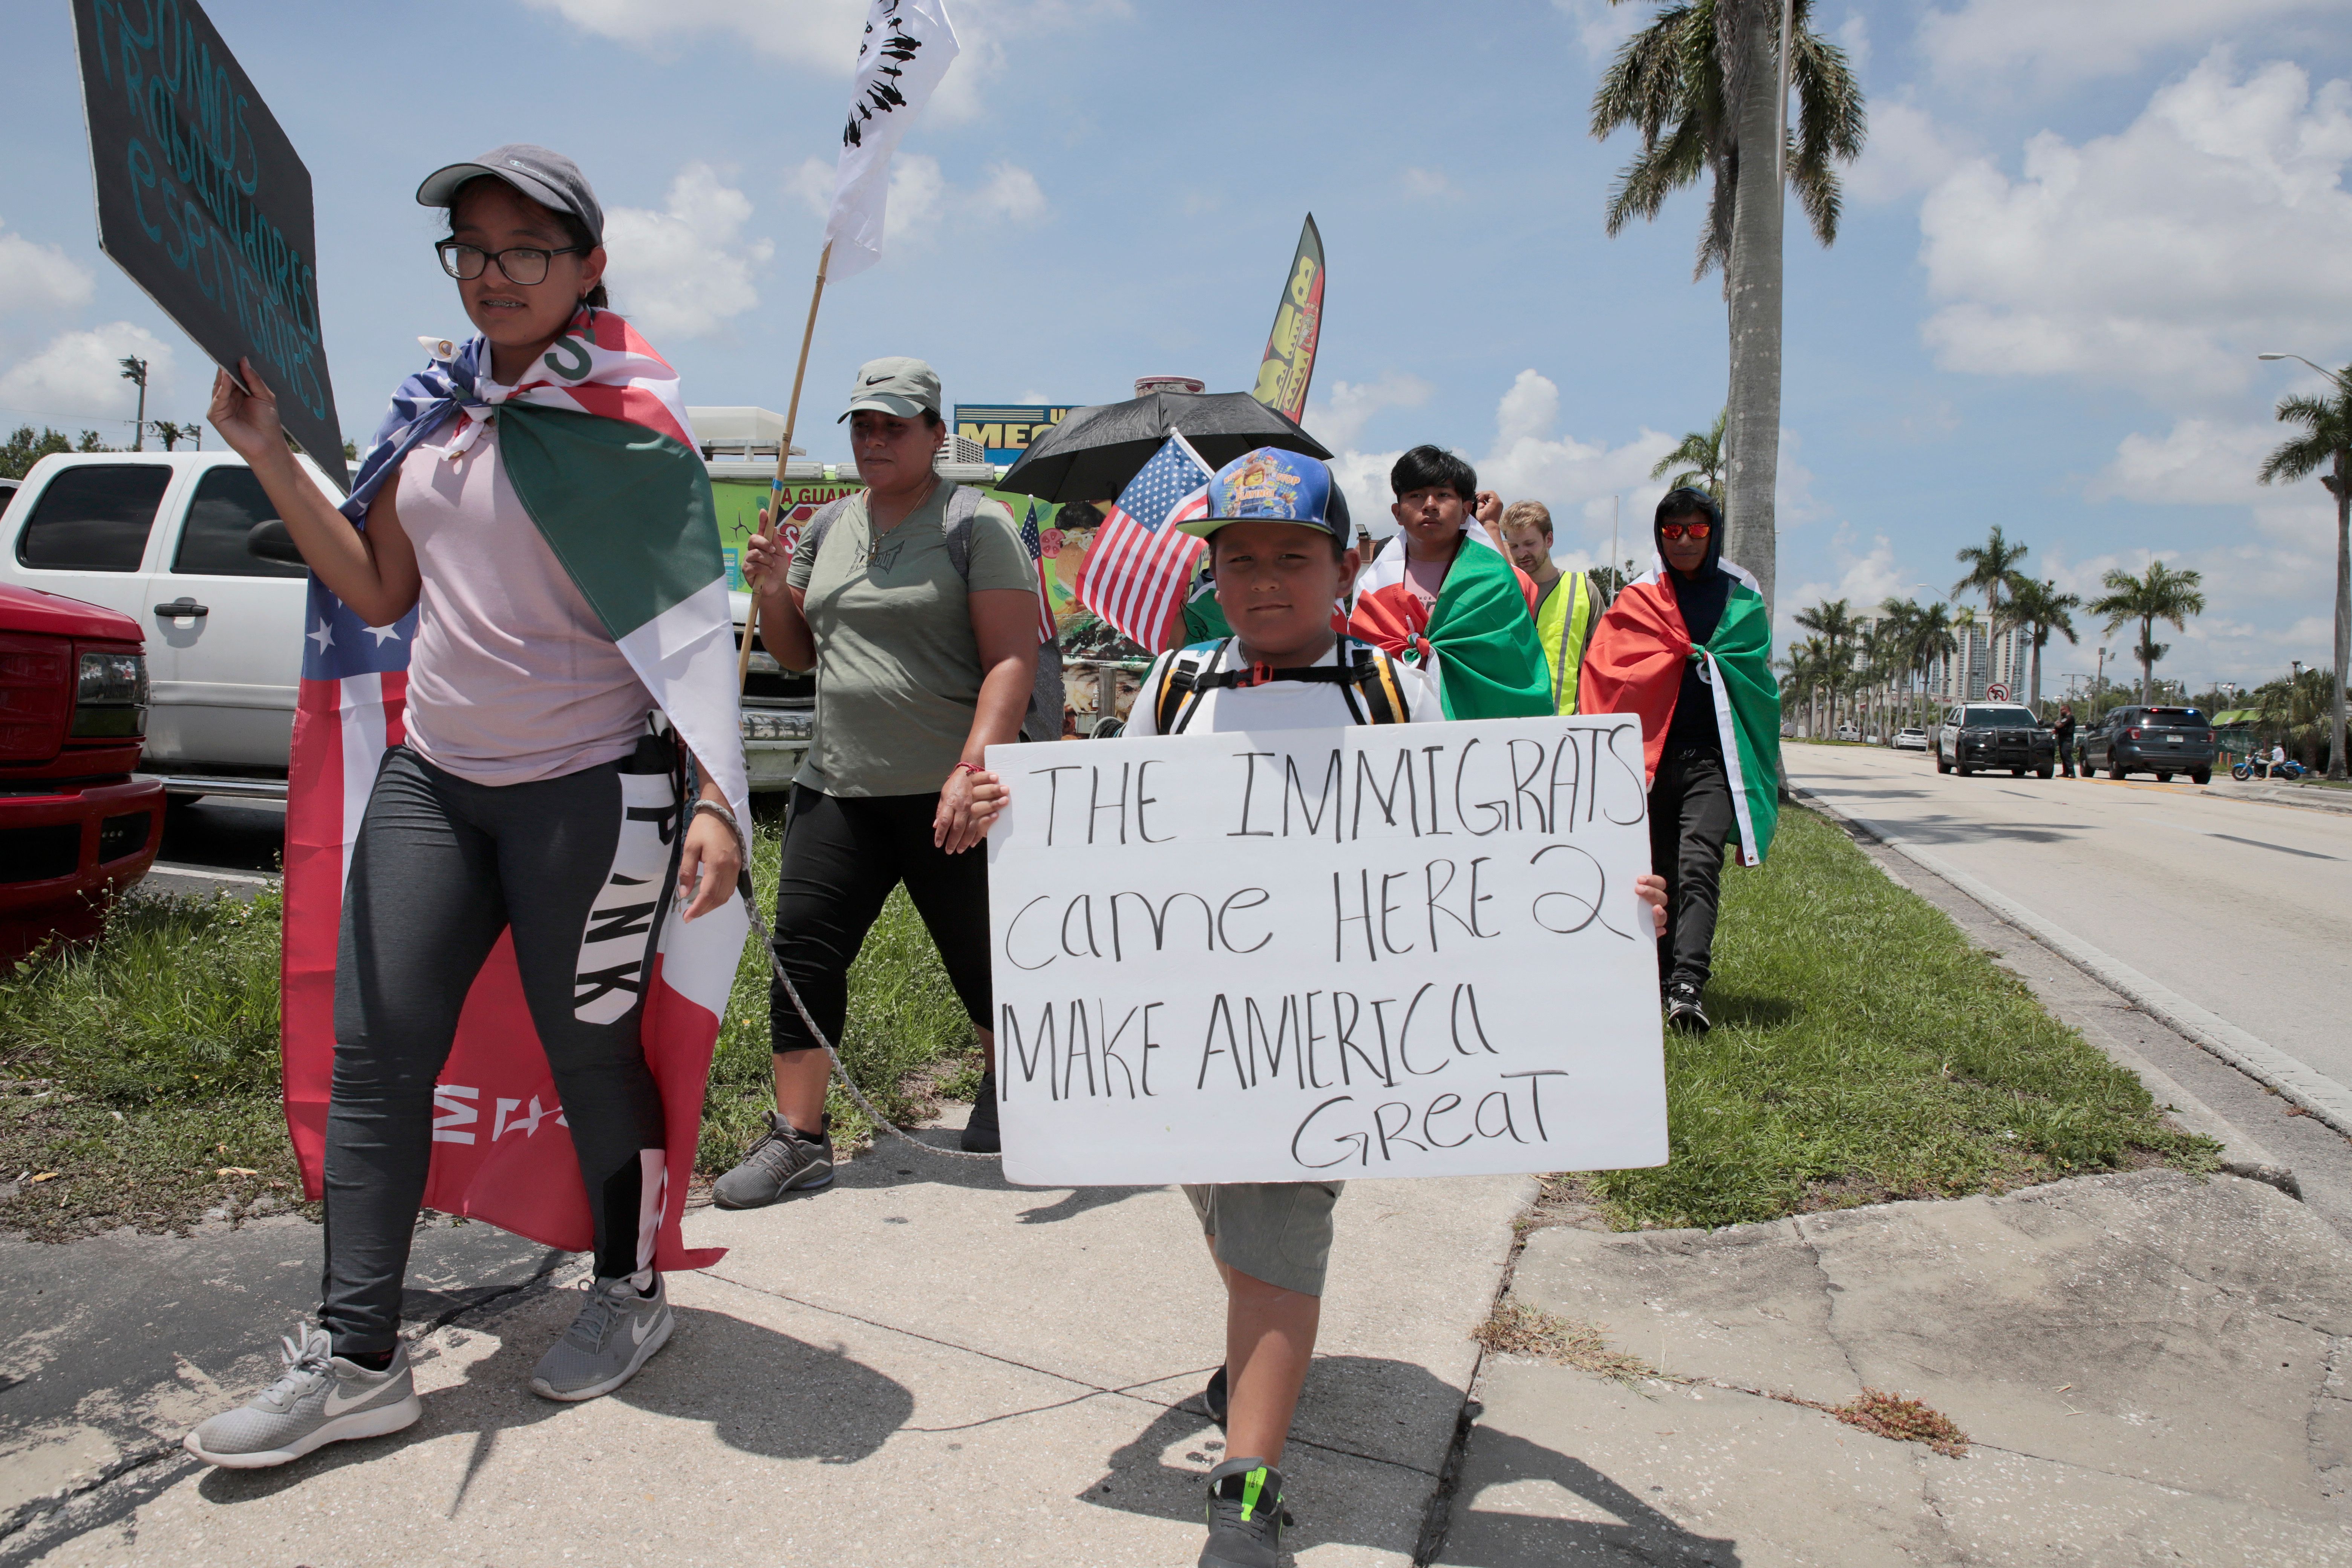 A protester walking with a group along a Florida road carries a sign that reads, “The immigrants came here to make America great.”